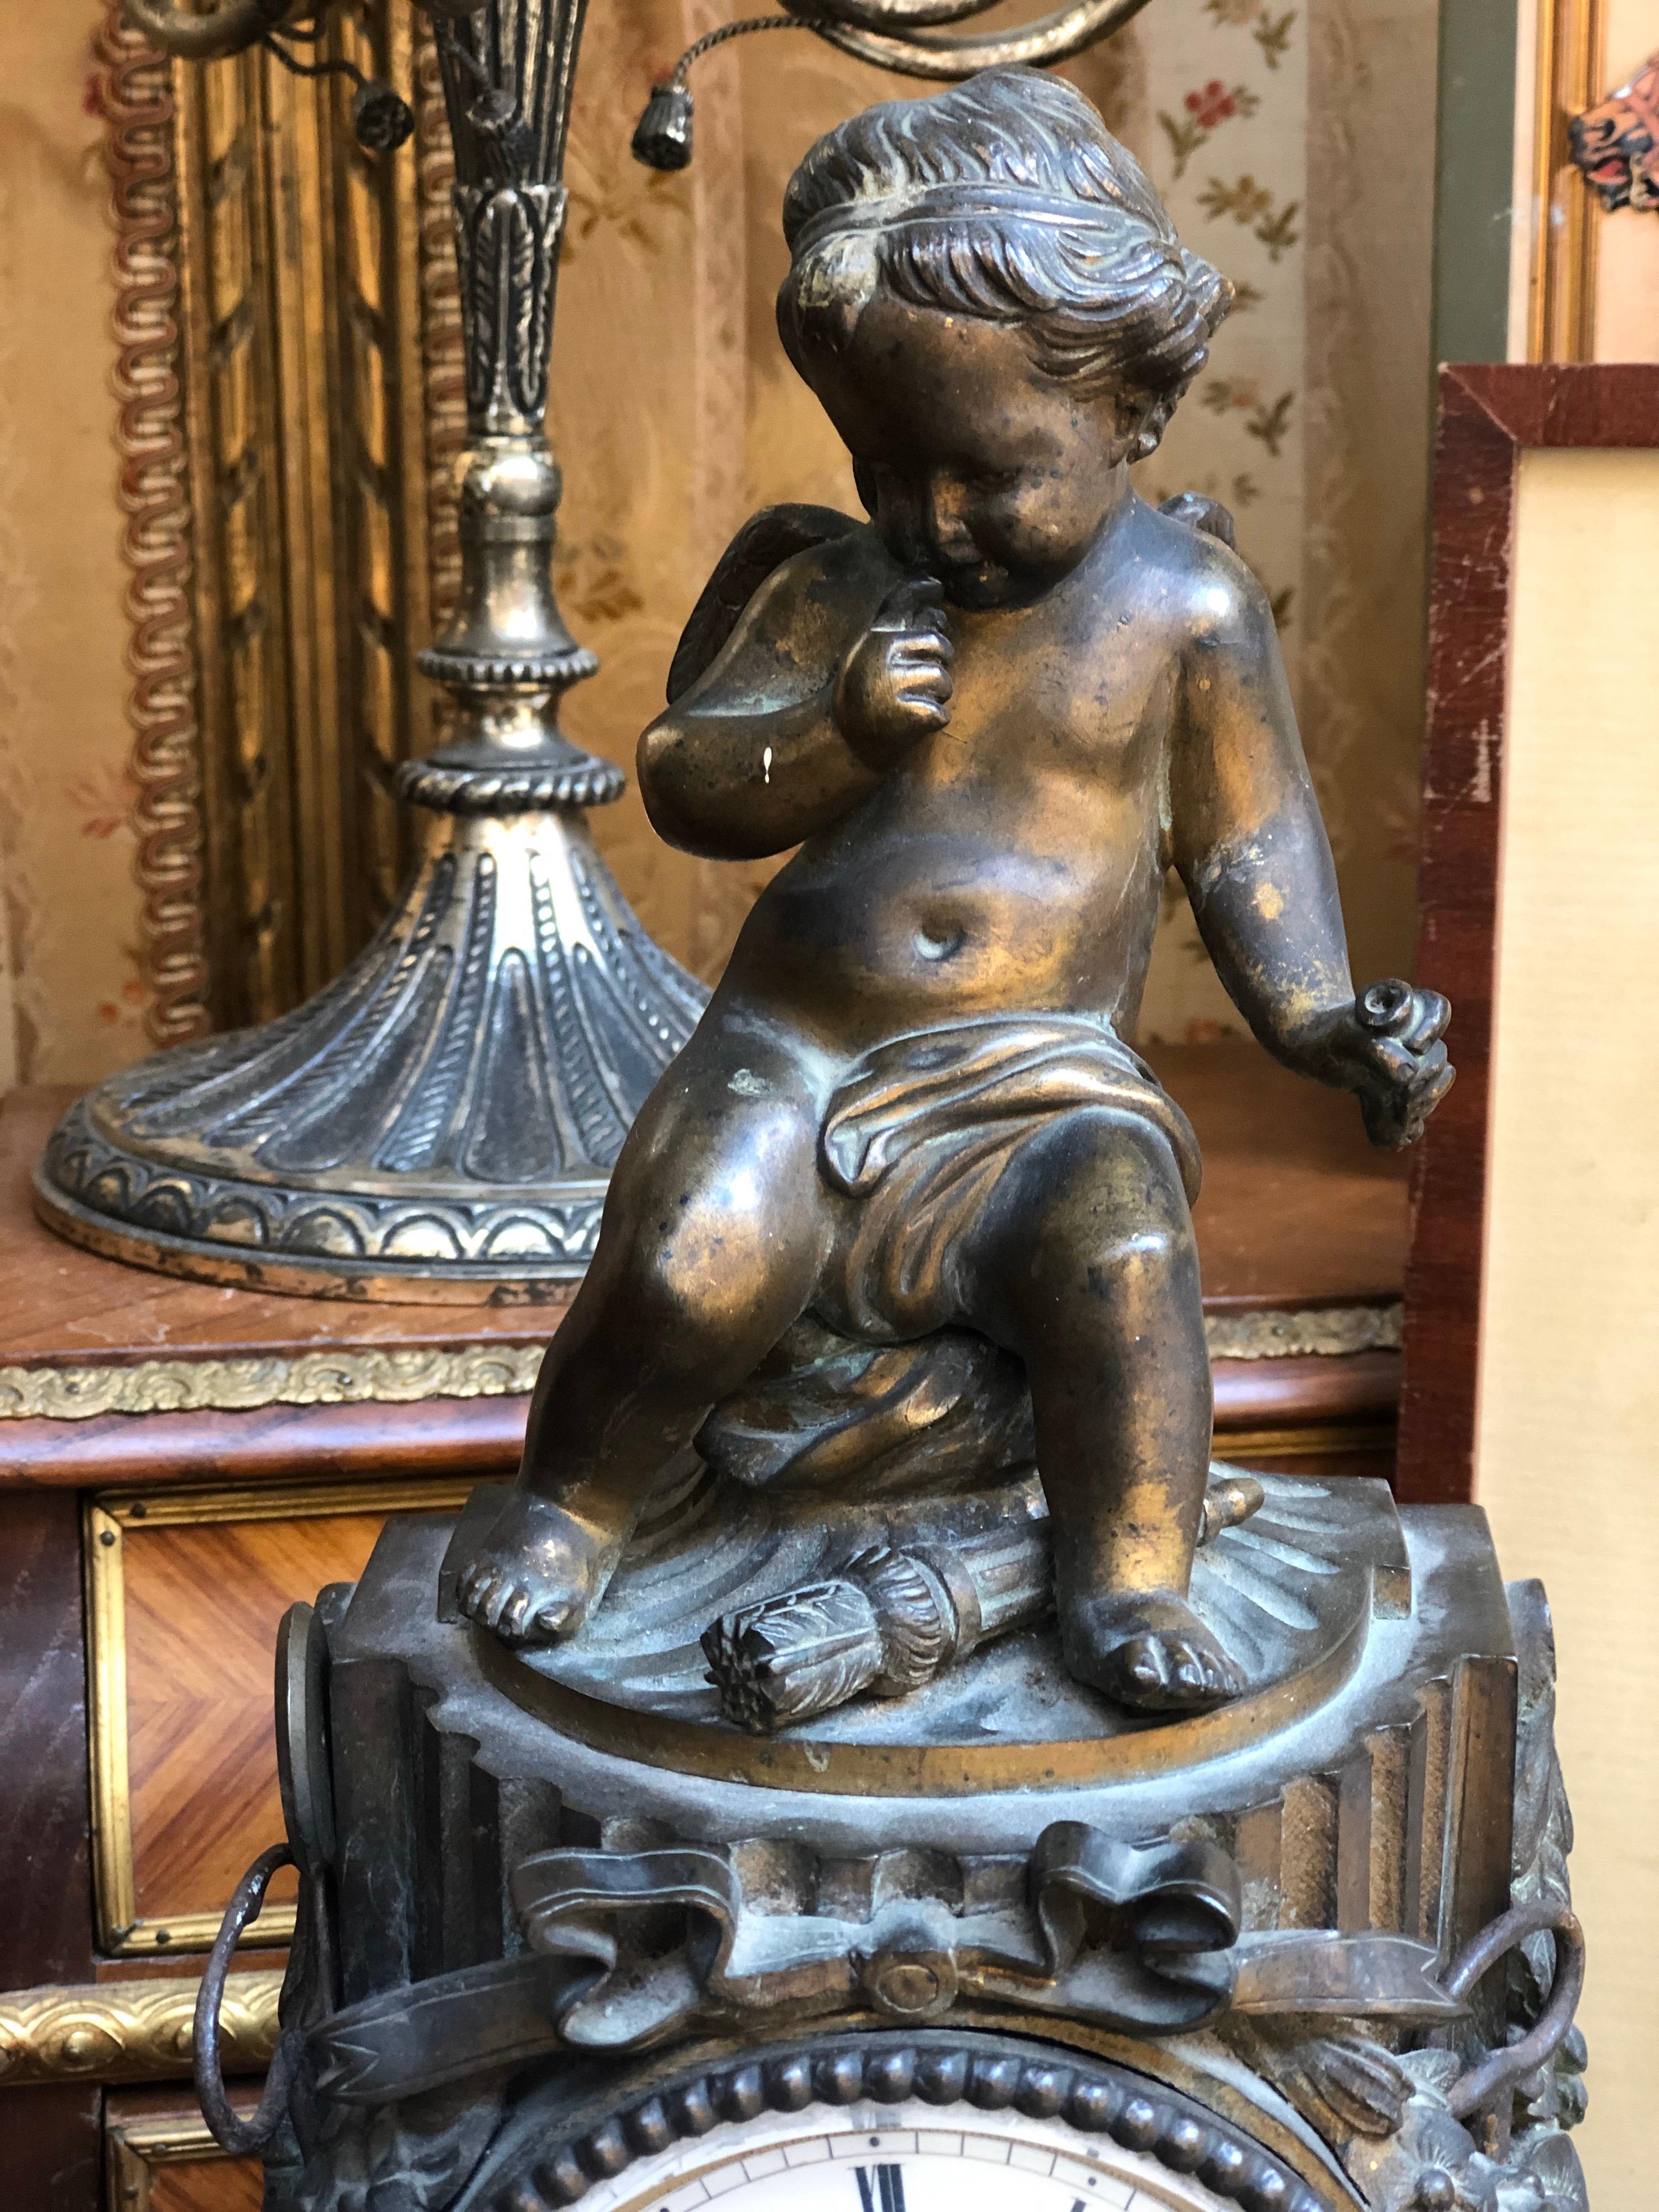 19th century French antique bronze desk or mantel clock dated circa 1870. The clock stands on curved base and features a carved sculpture of a seating cupid. The intricate clock mechanism has been cleaned and checked and is in wonderful working